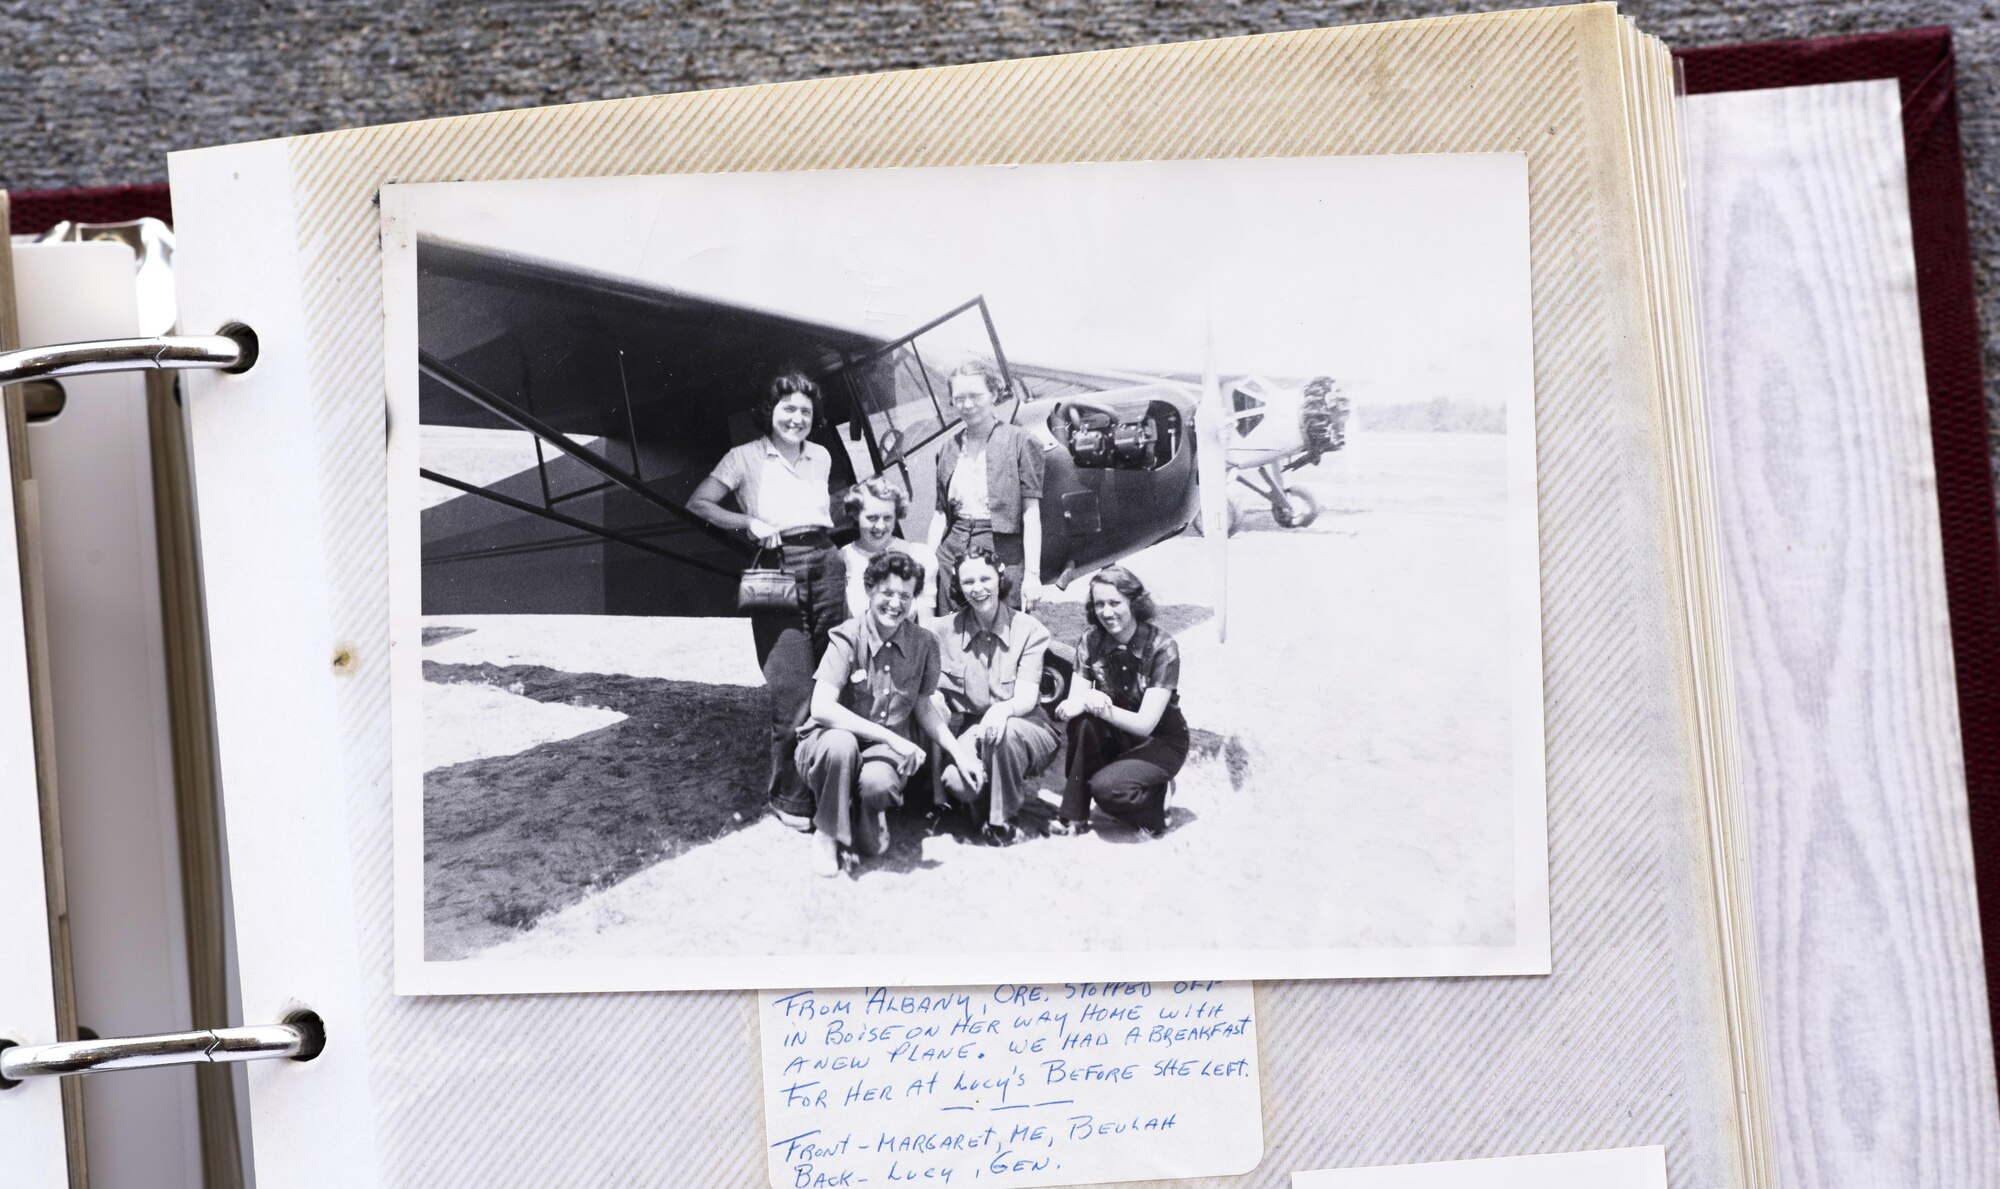 Elaine McCalley poses with her friends in front of a new plane in Boise, Idaho. She was inducted into the Idaho Aviation Hall of Fame.(U.S. Air Force Photo by Senior Airman Jeremy L. Mosier)